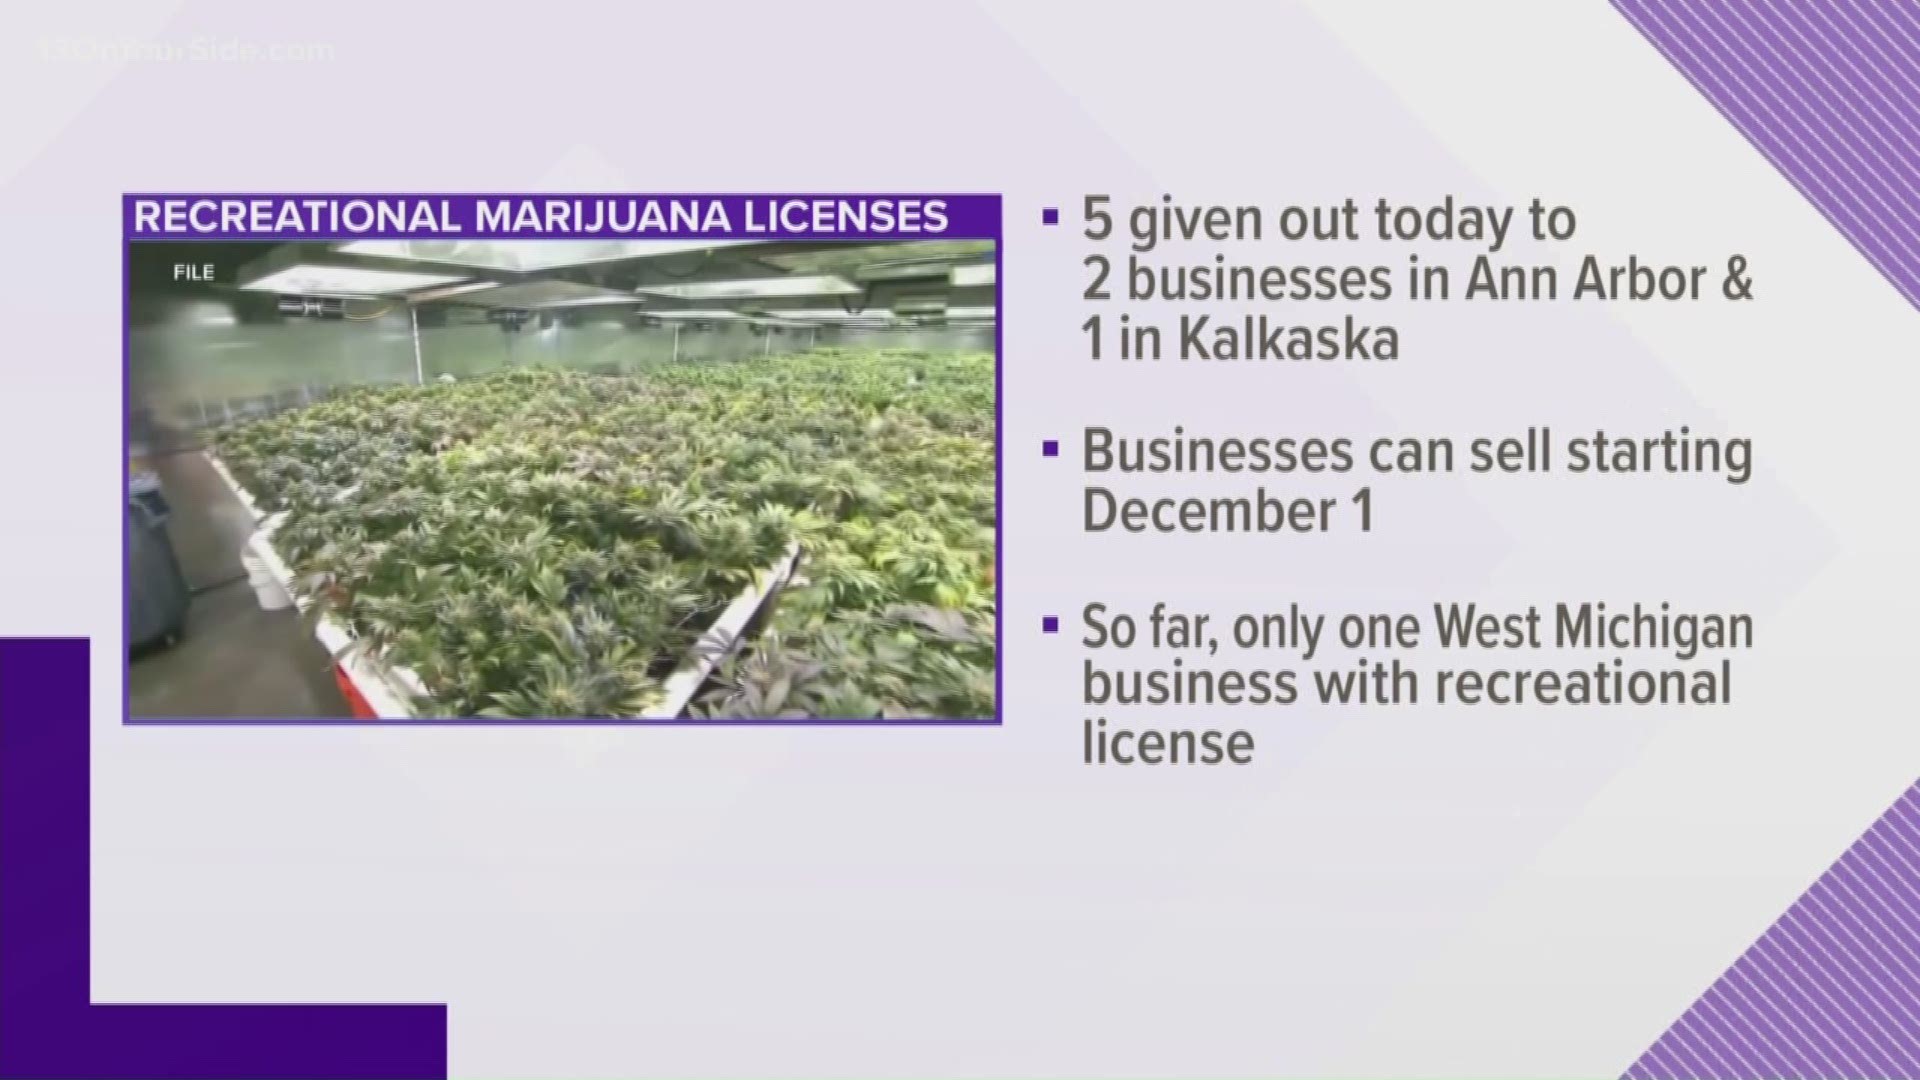 Exclusive Brands LLC in Ann Arbor received licenses for growing, processing and selling adult-use pot.